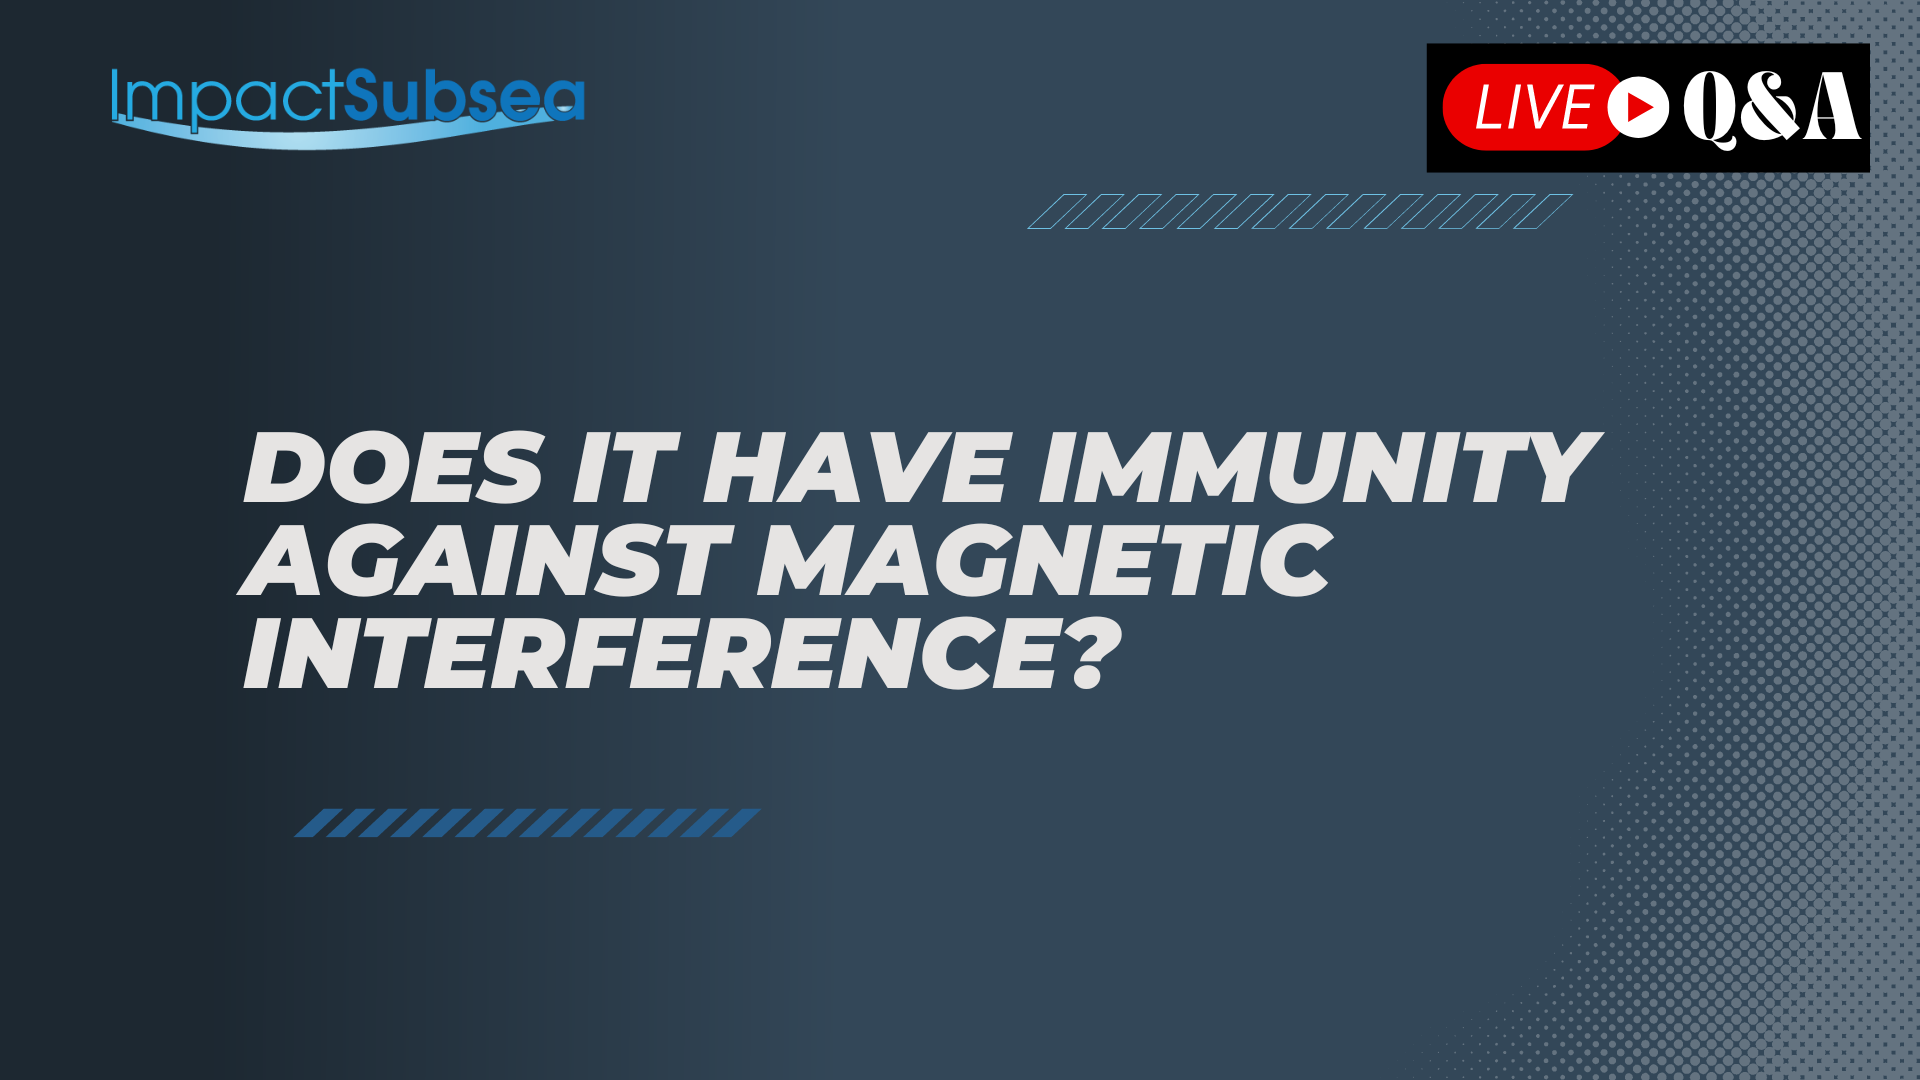 Does the depth sensor ISD4000 [with AHRS] have immunity against temporary magnetic interference